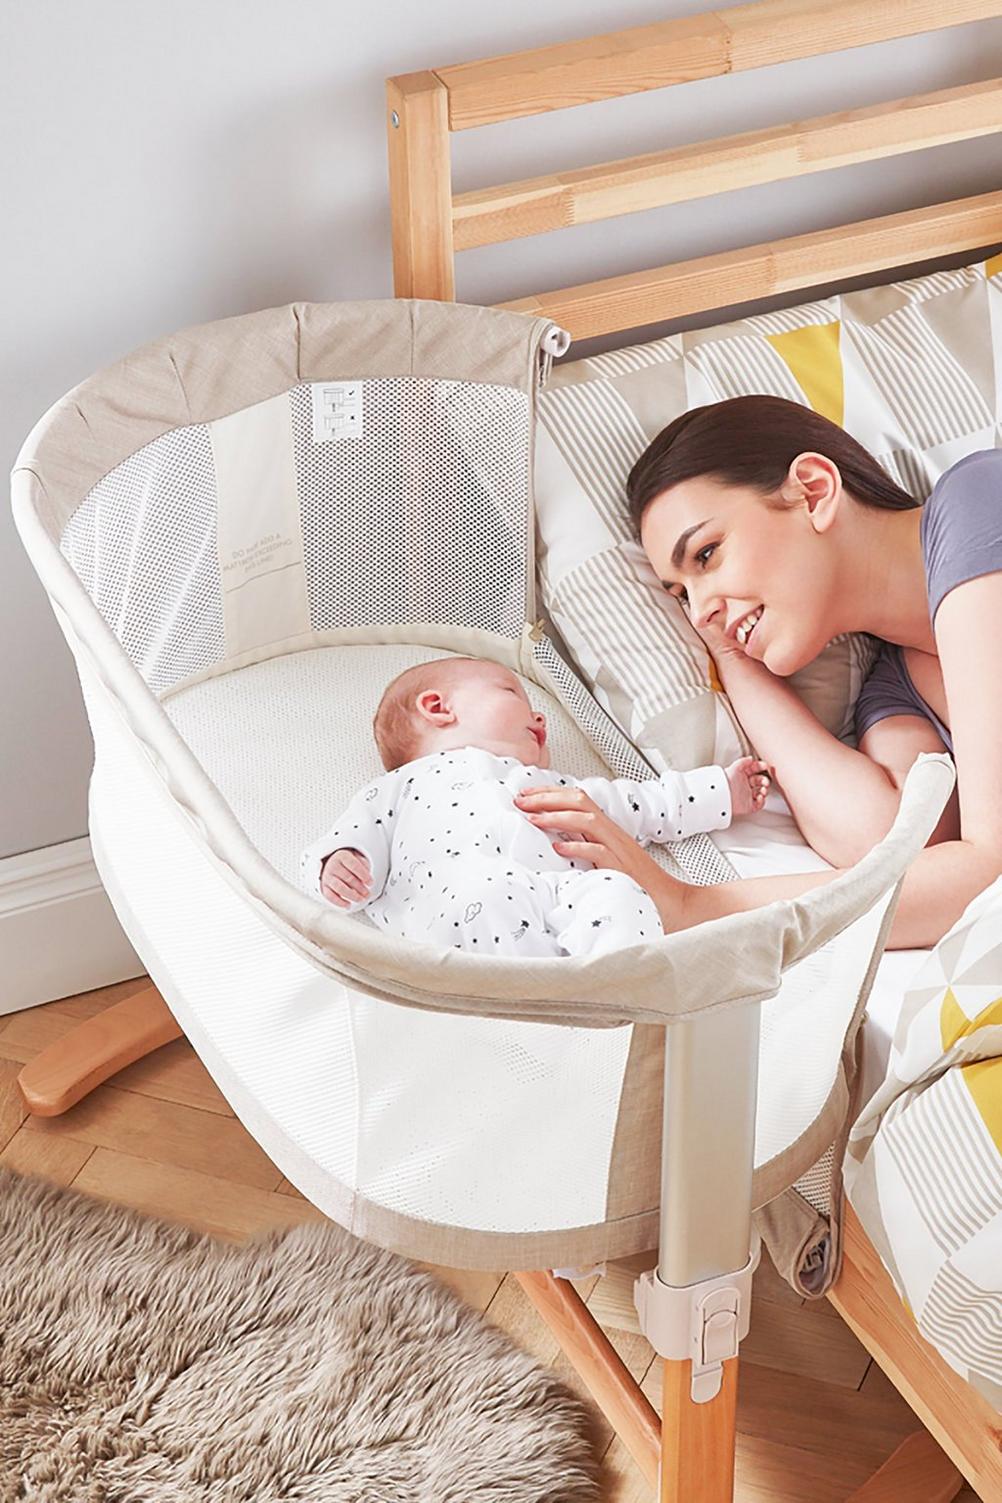 baby bed that connects to bed